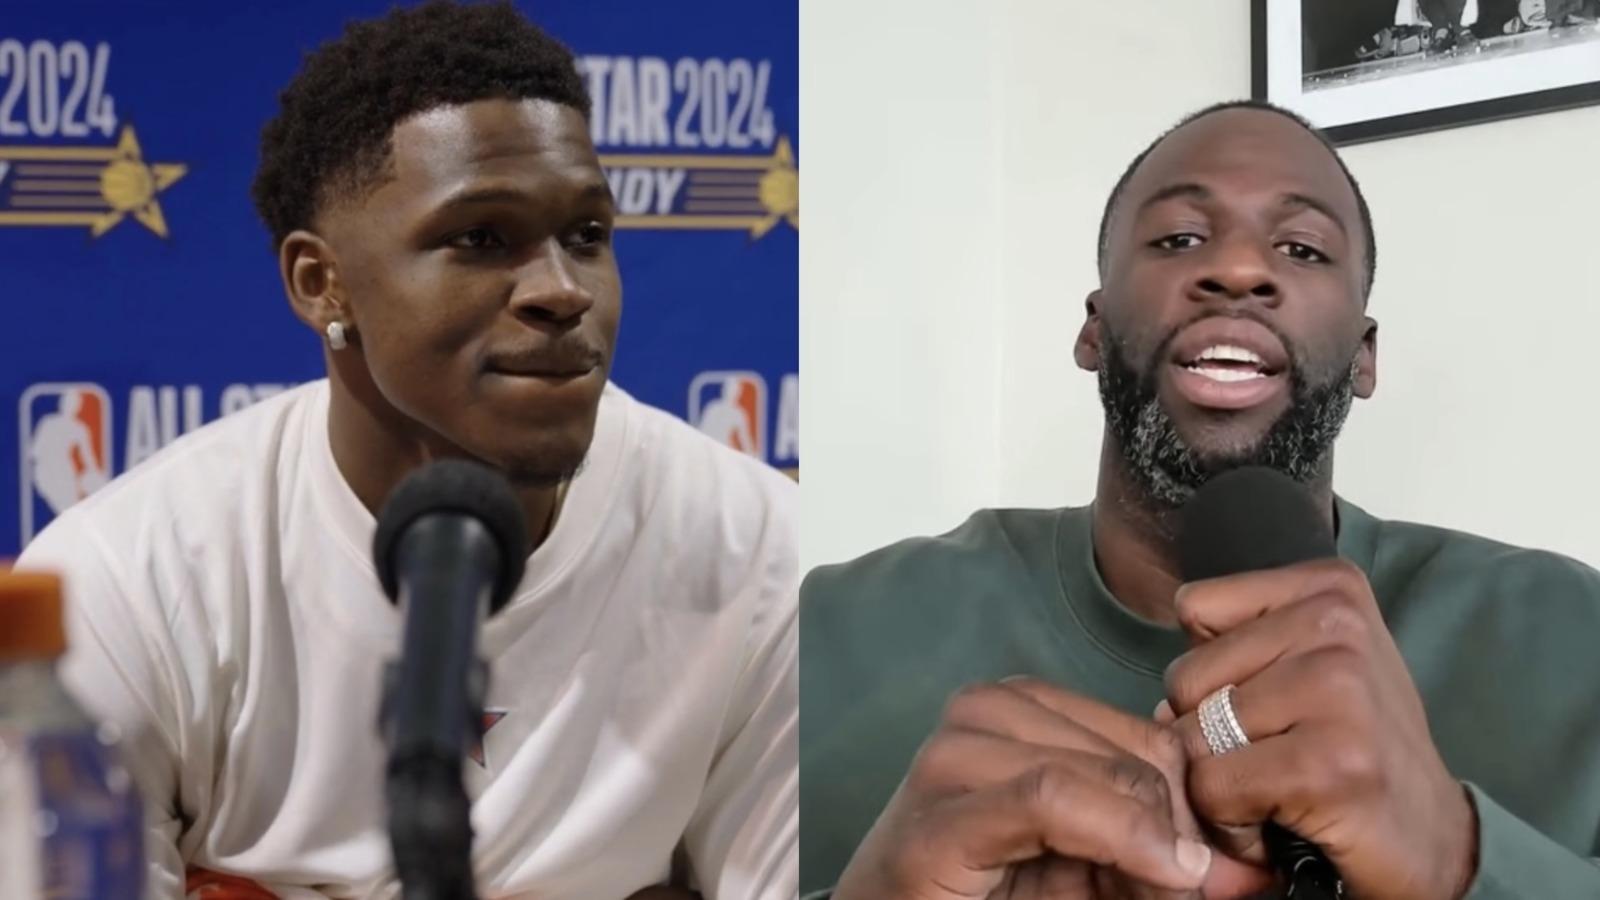 Draymond Green criticizes Anthony Edwards’ All-Star Weekend approach, saying he isn’t ready to be the face of the NBA